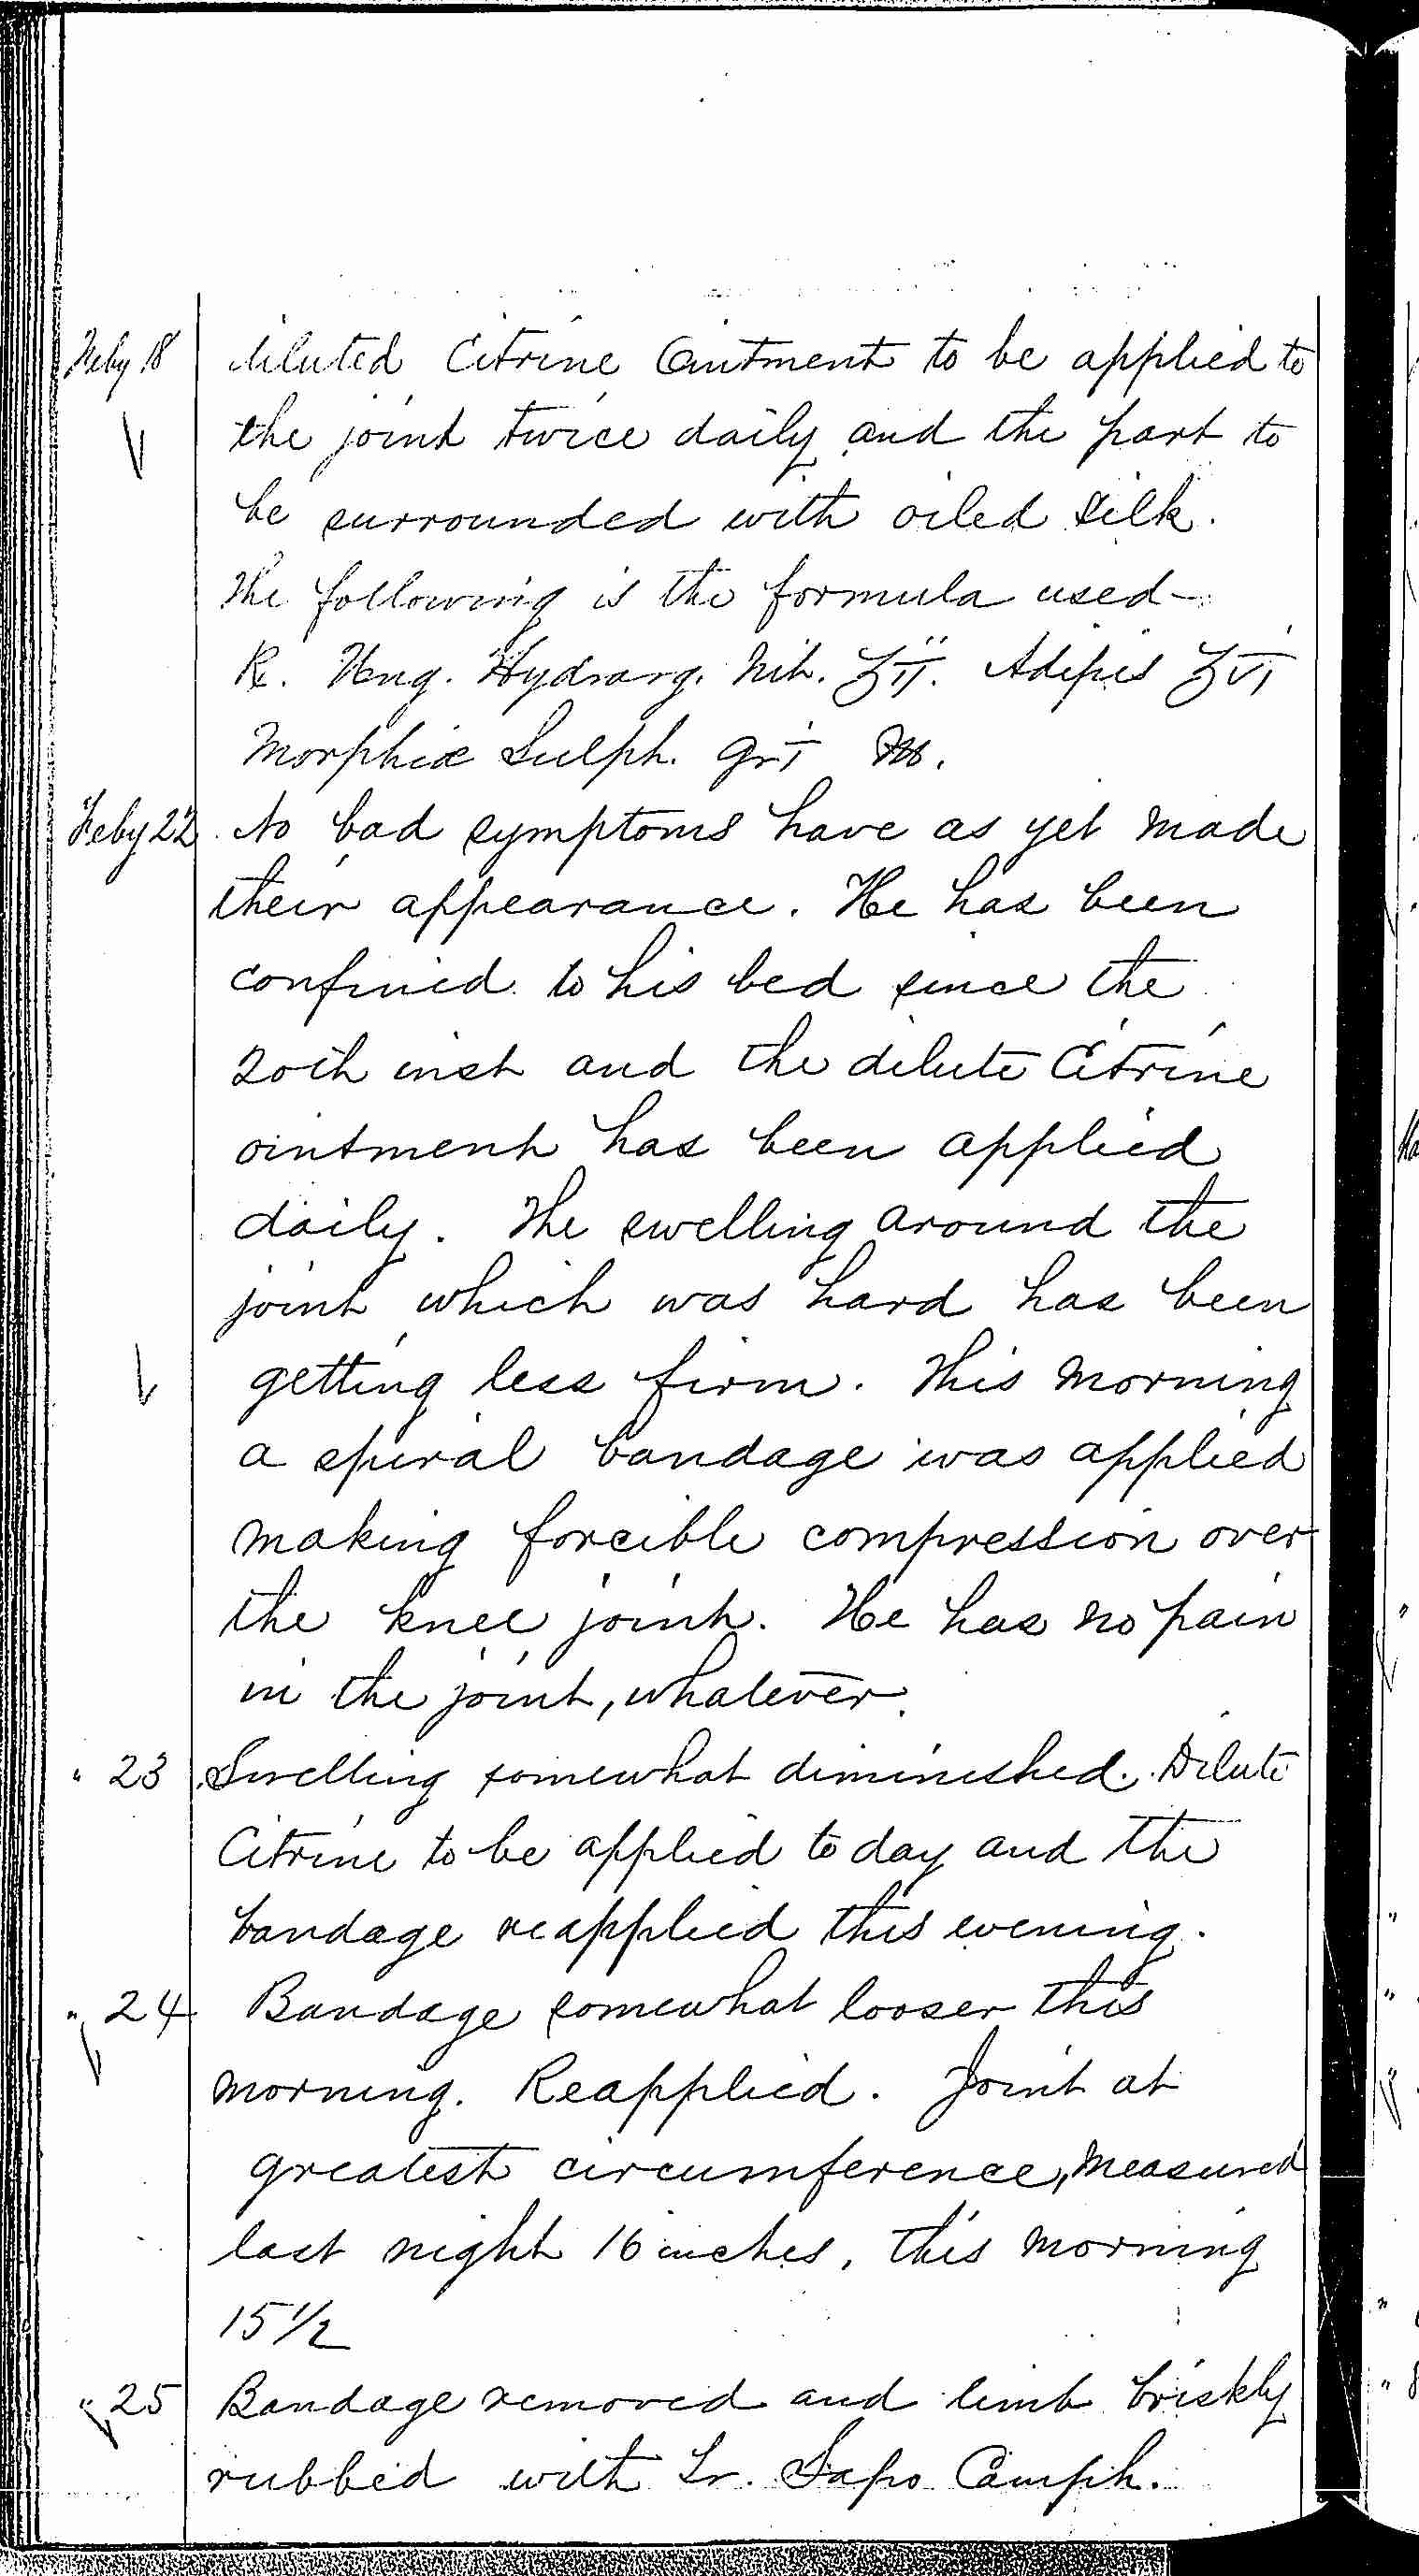 Entry for Henry James (page 2 of 8) in the log Hospital Tickets and Case Papers - Naval Hospital - Washington, D.C. - 1868-69